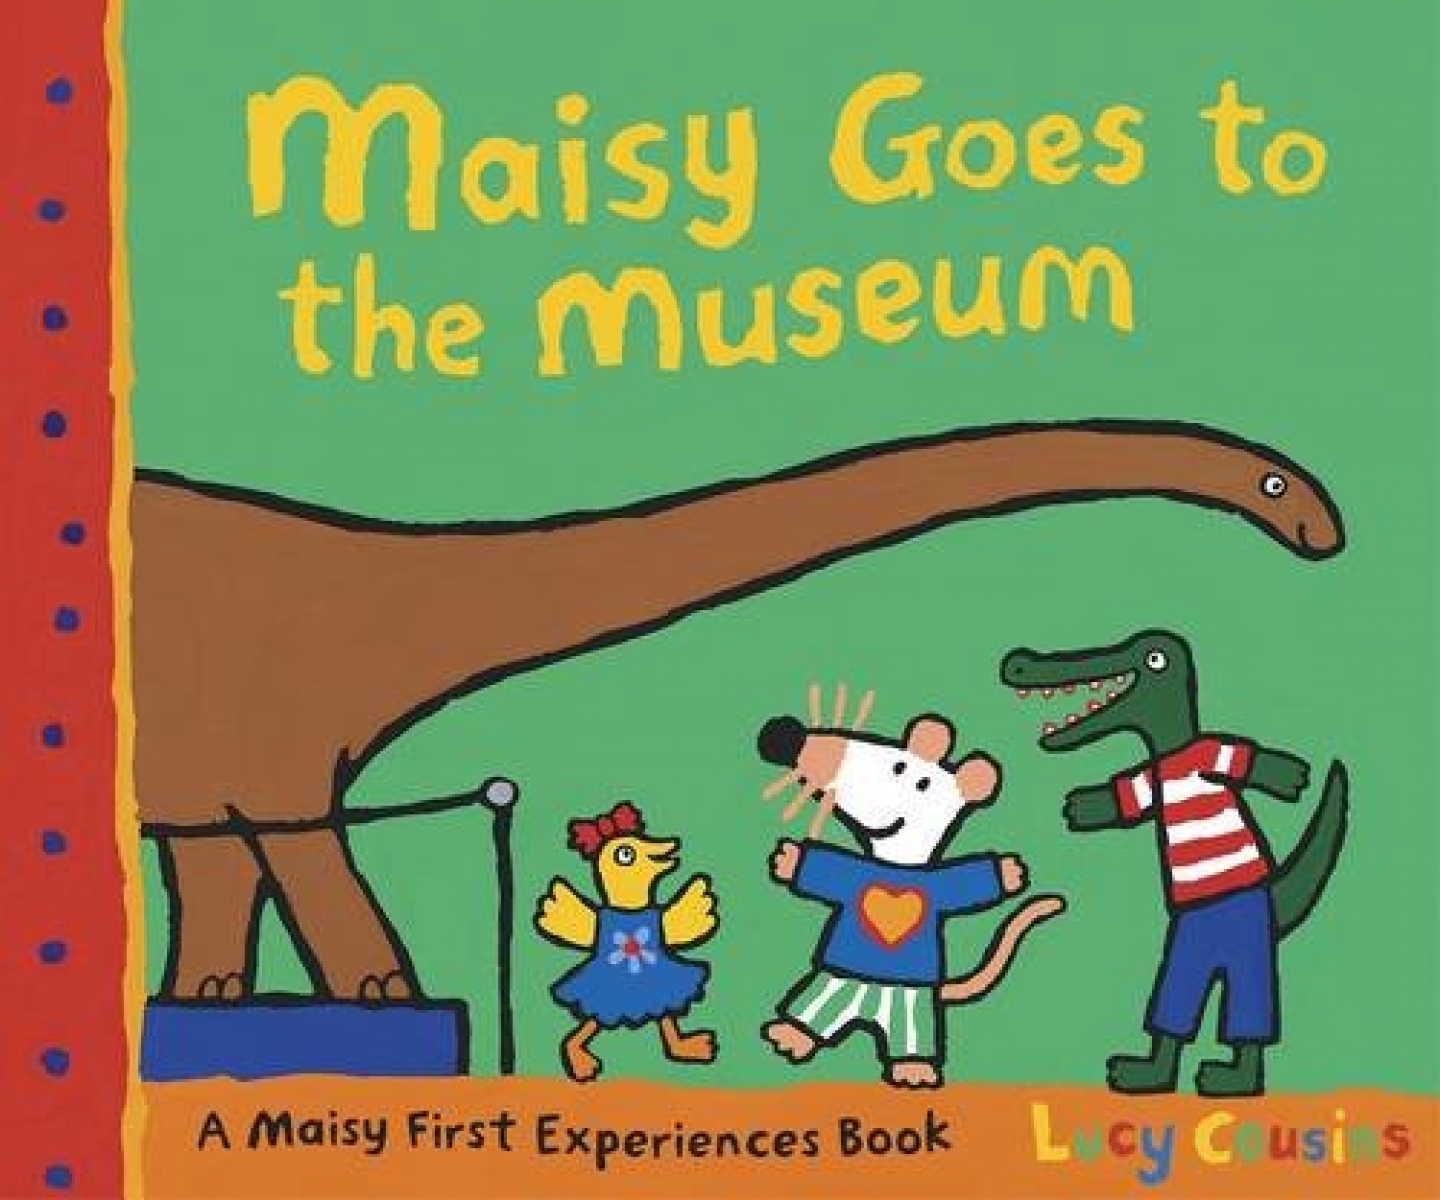 Lucy, Cousins Maisy Goes to the Museum 